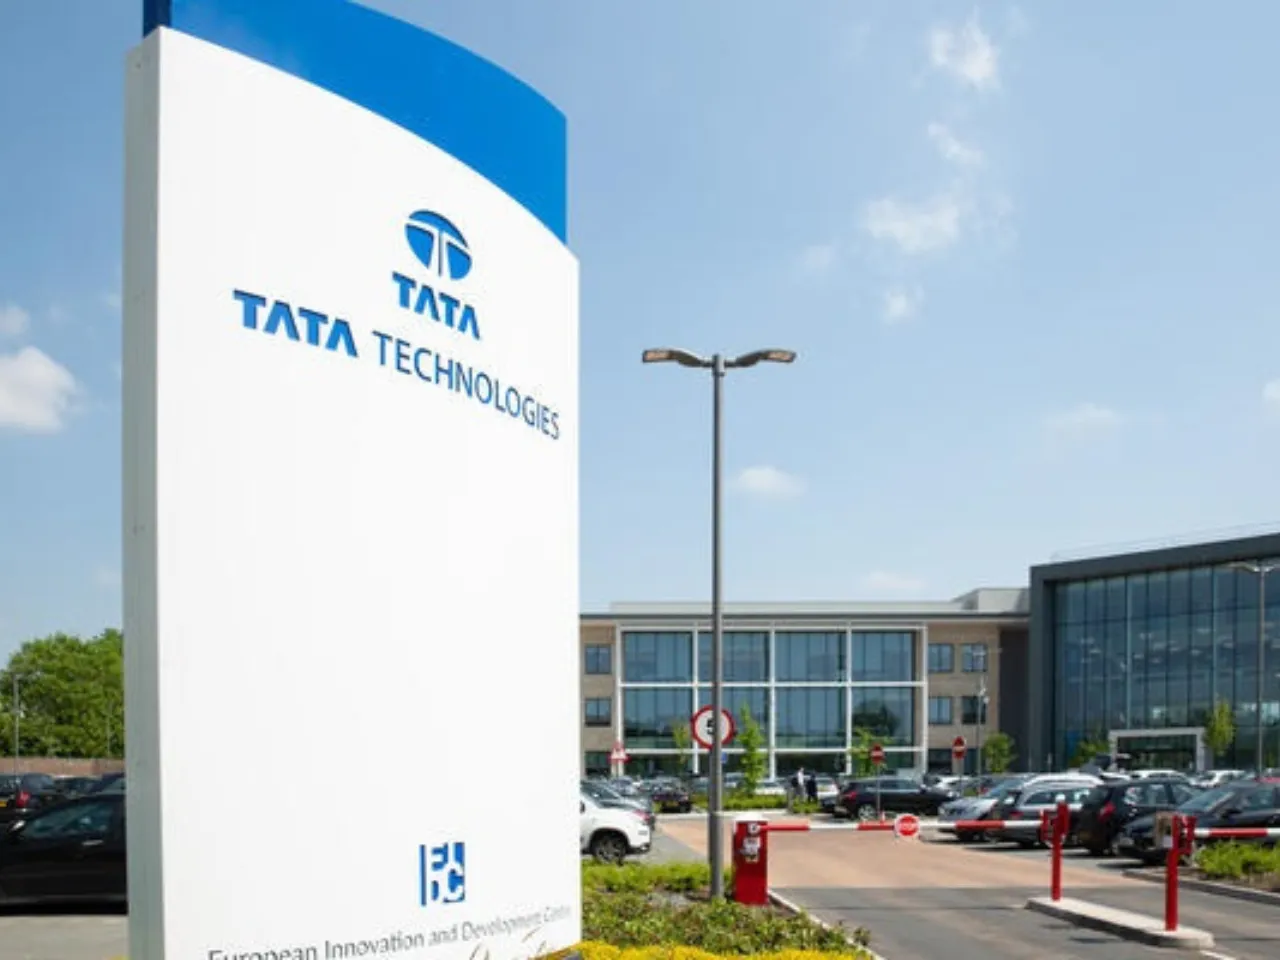 Tata Technologies to invest Rs 2,000 crore to set up engineering centers for MSMEs